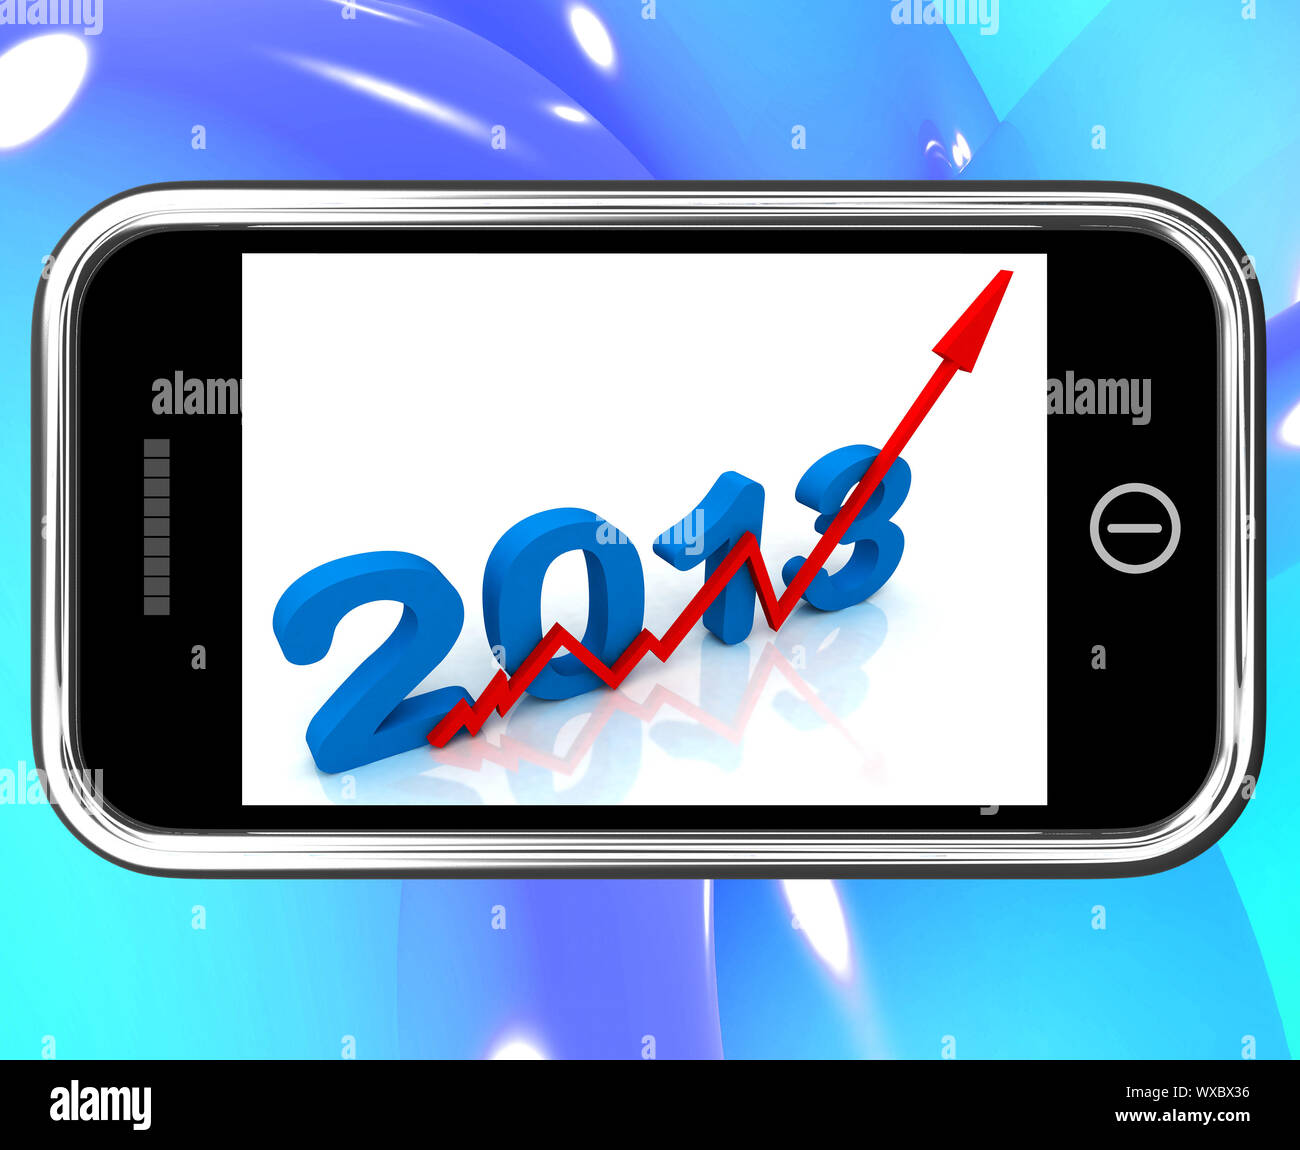 2013 On Smartphone Shows Financial Forecasting And Monetary Predictions Stock Photo